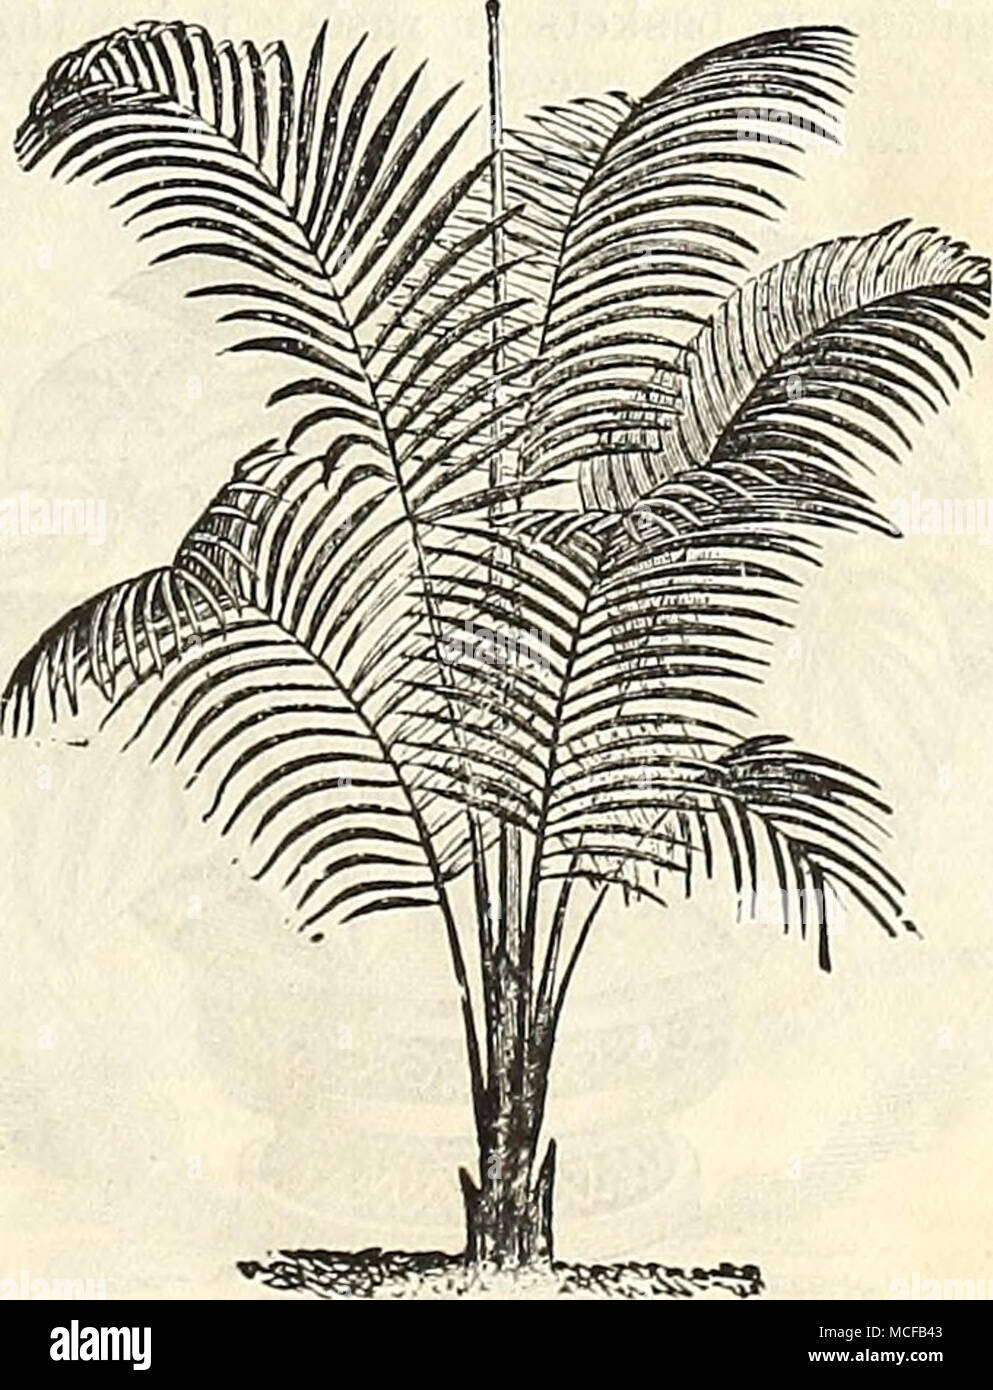 . Cocos Weddelliana. &quot; Palms arrived to-day in fine condition after beinq on the road for ten days. Everything satisfactory tome, thanks tor the extras.&quot; April 11, 1895. â GEORGE MIELLEZ, Westfield, Mass. Stock Photo